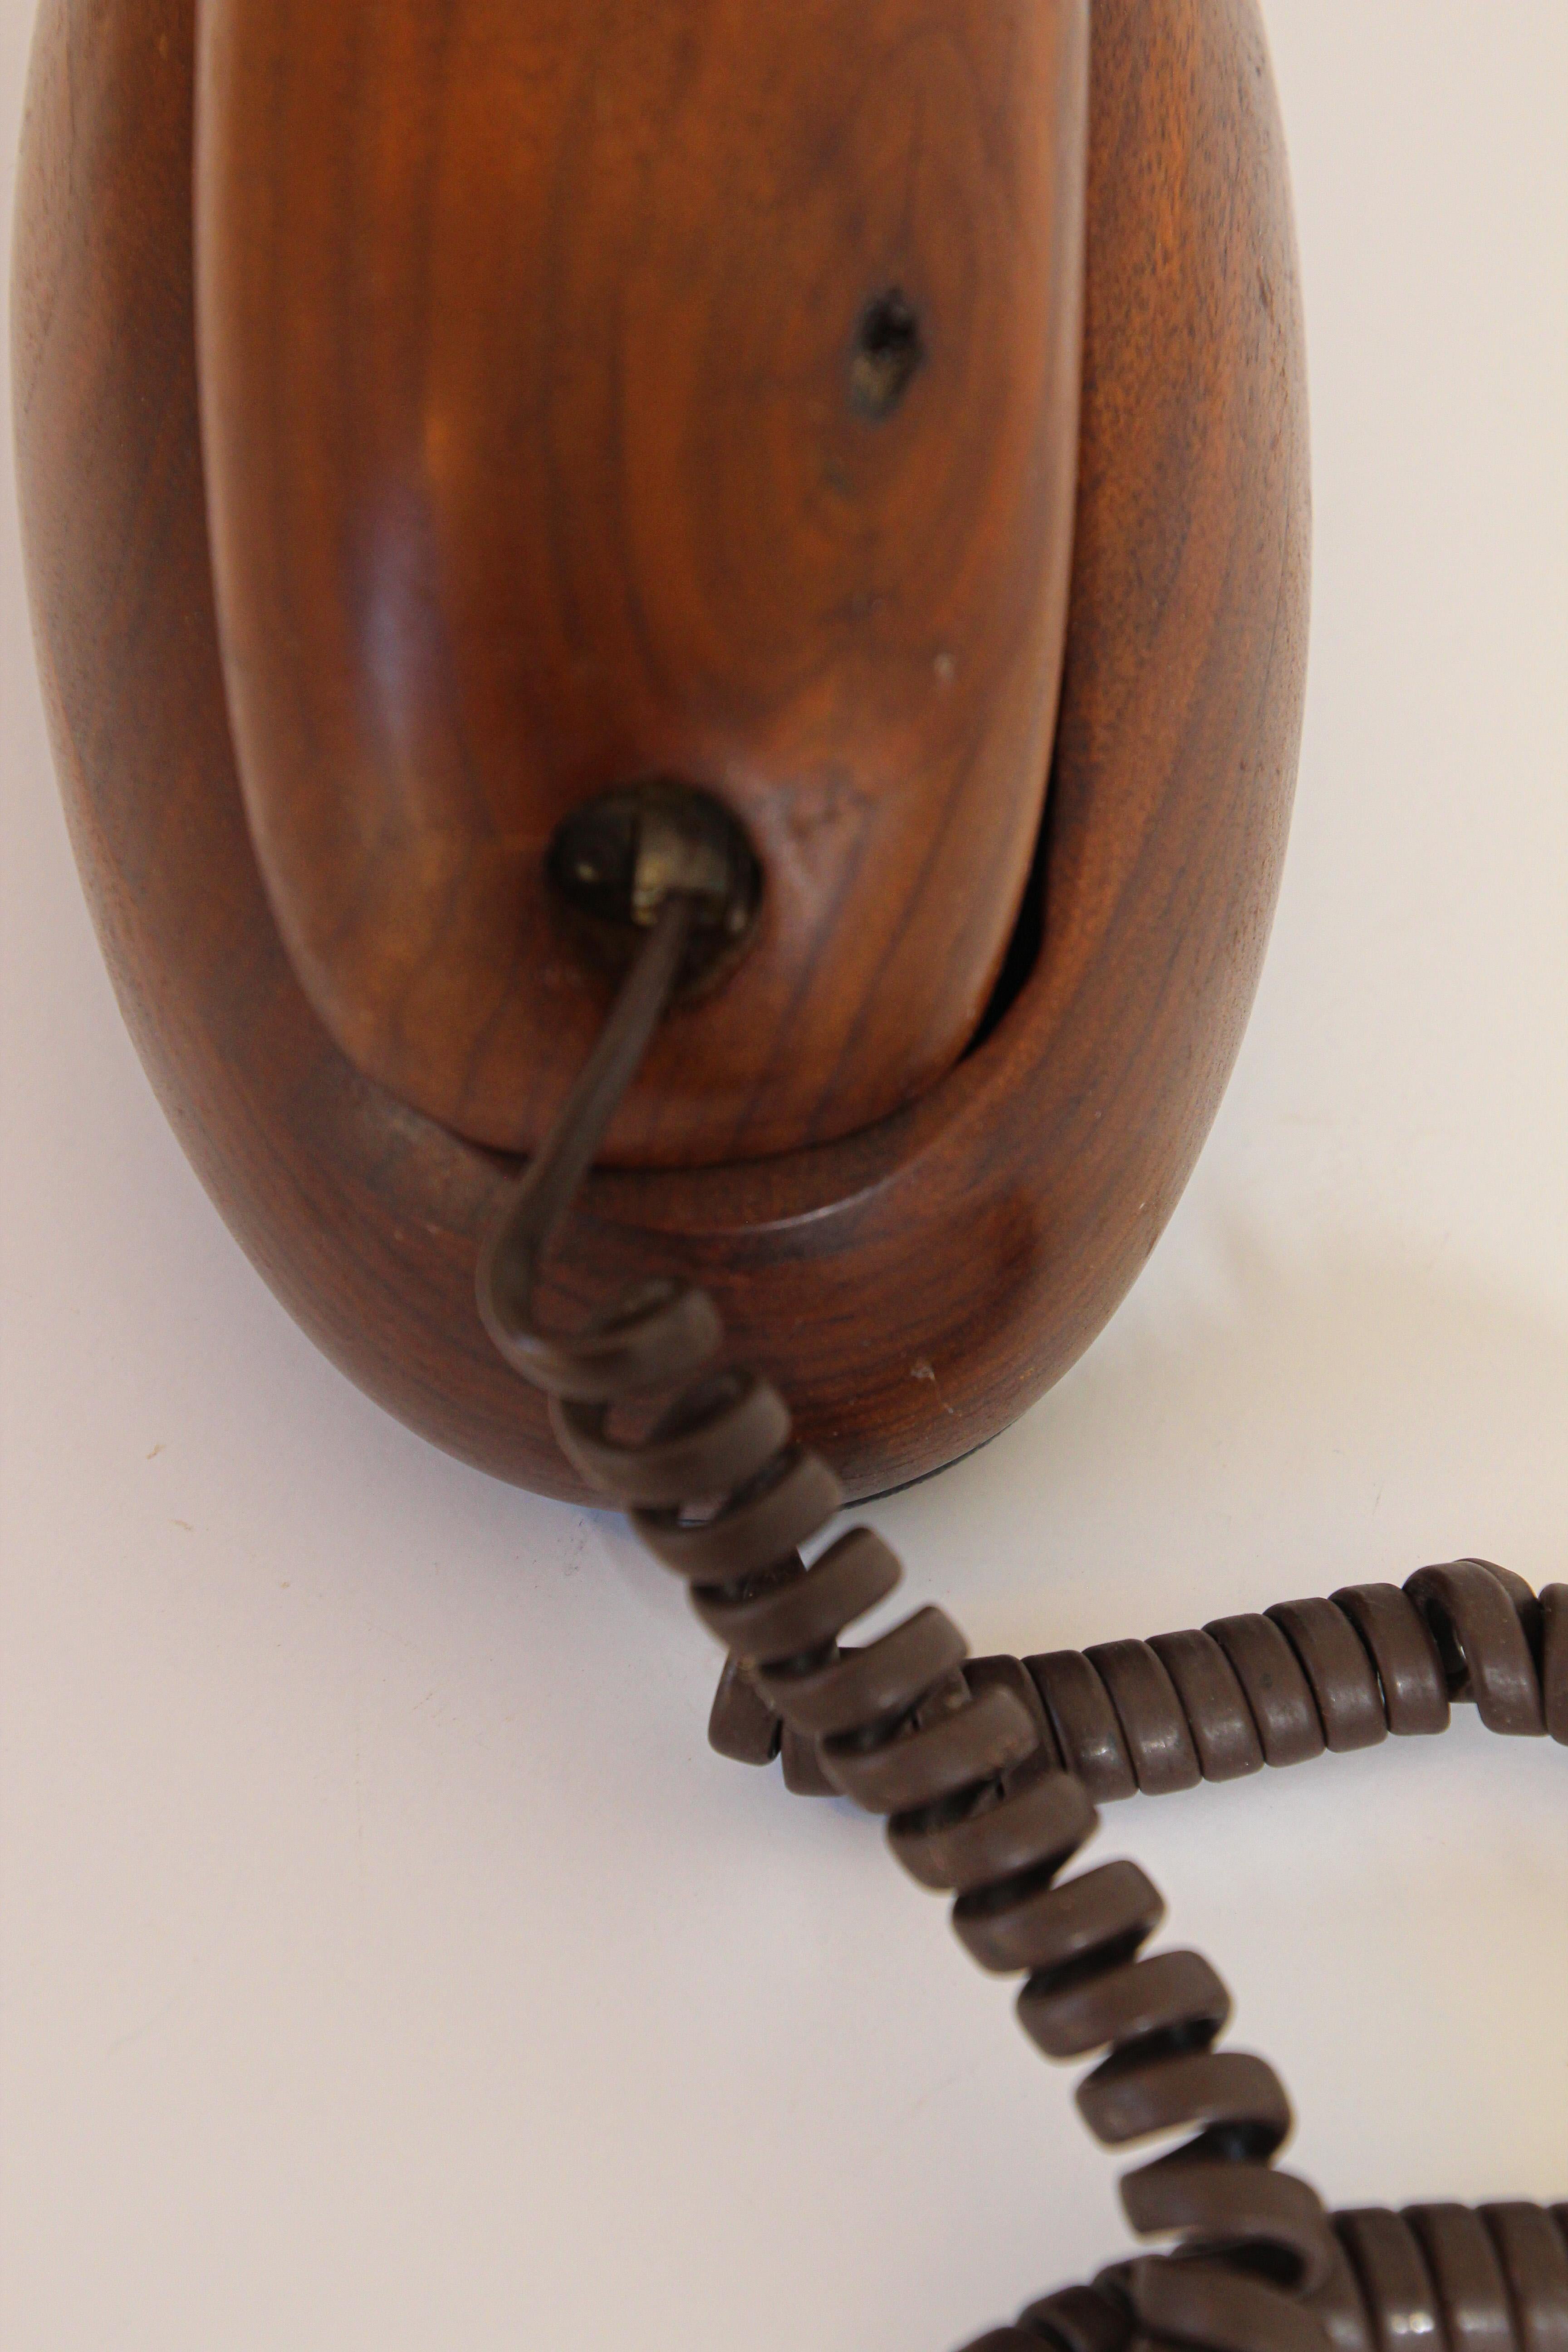 Vintage Telephone Covered in Wood, Organic Modern Style Retro Phone 3